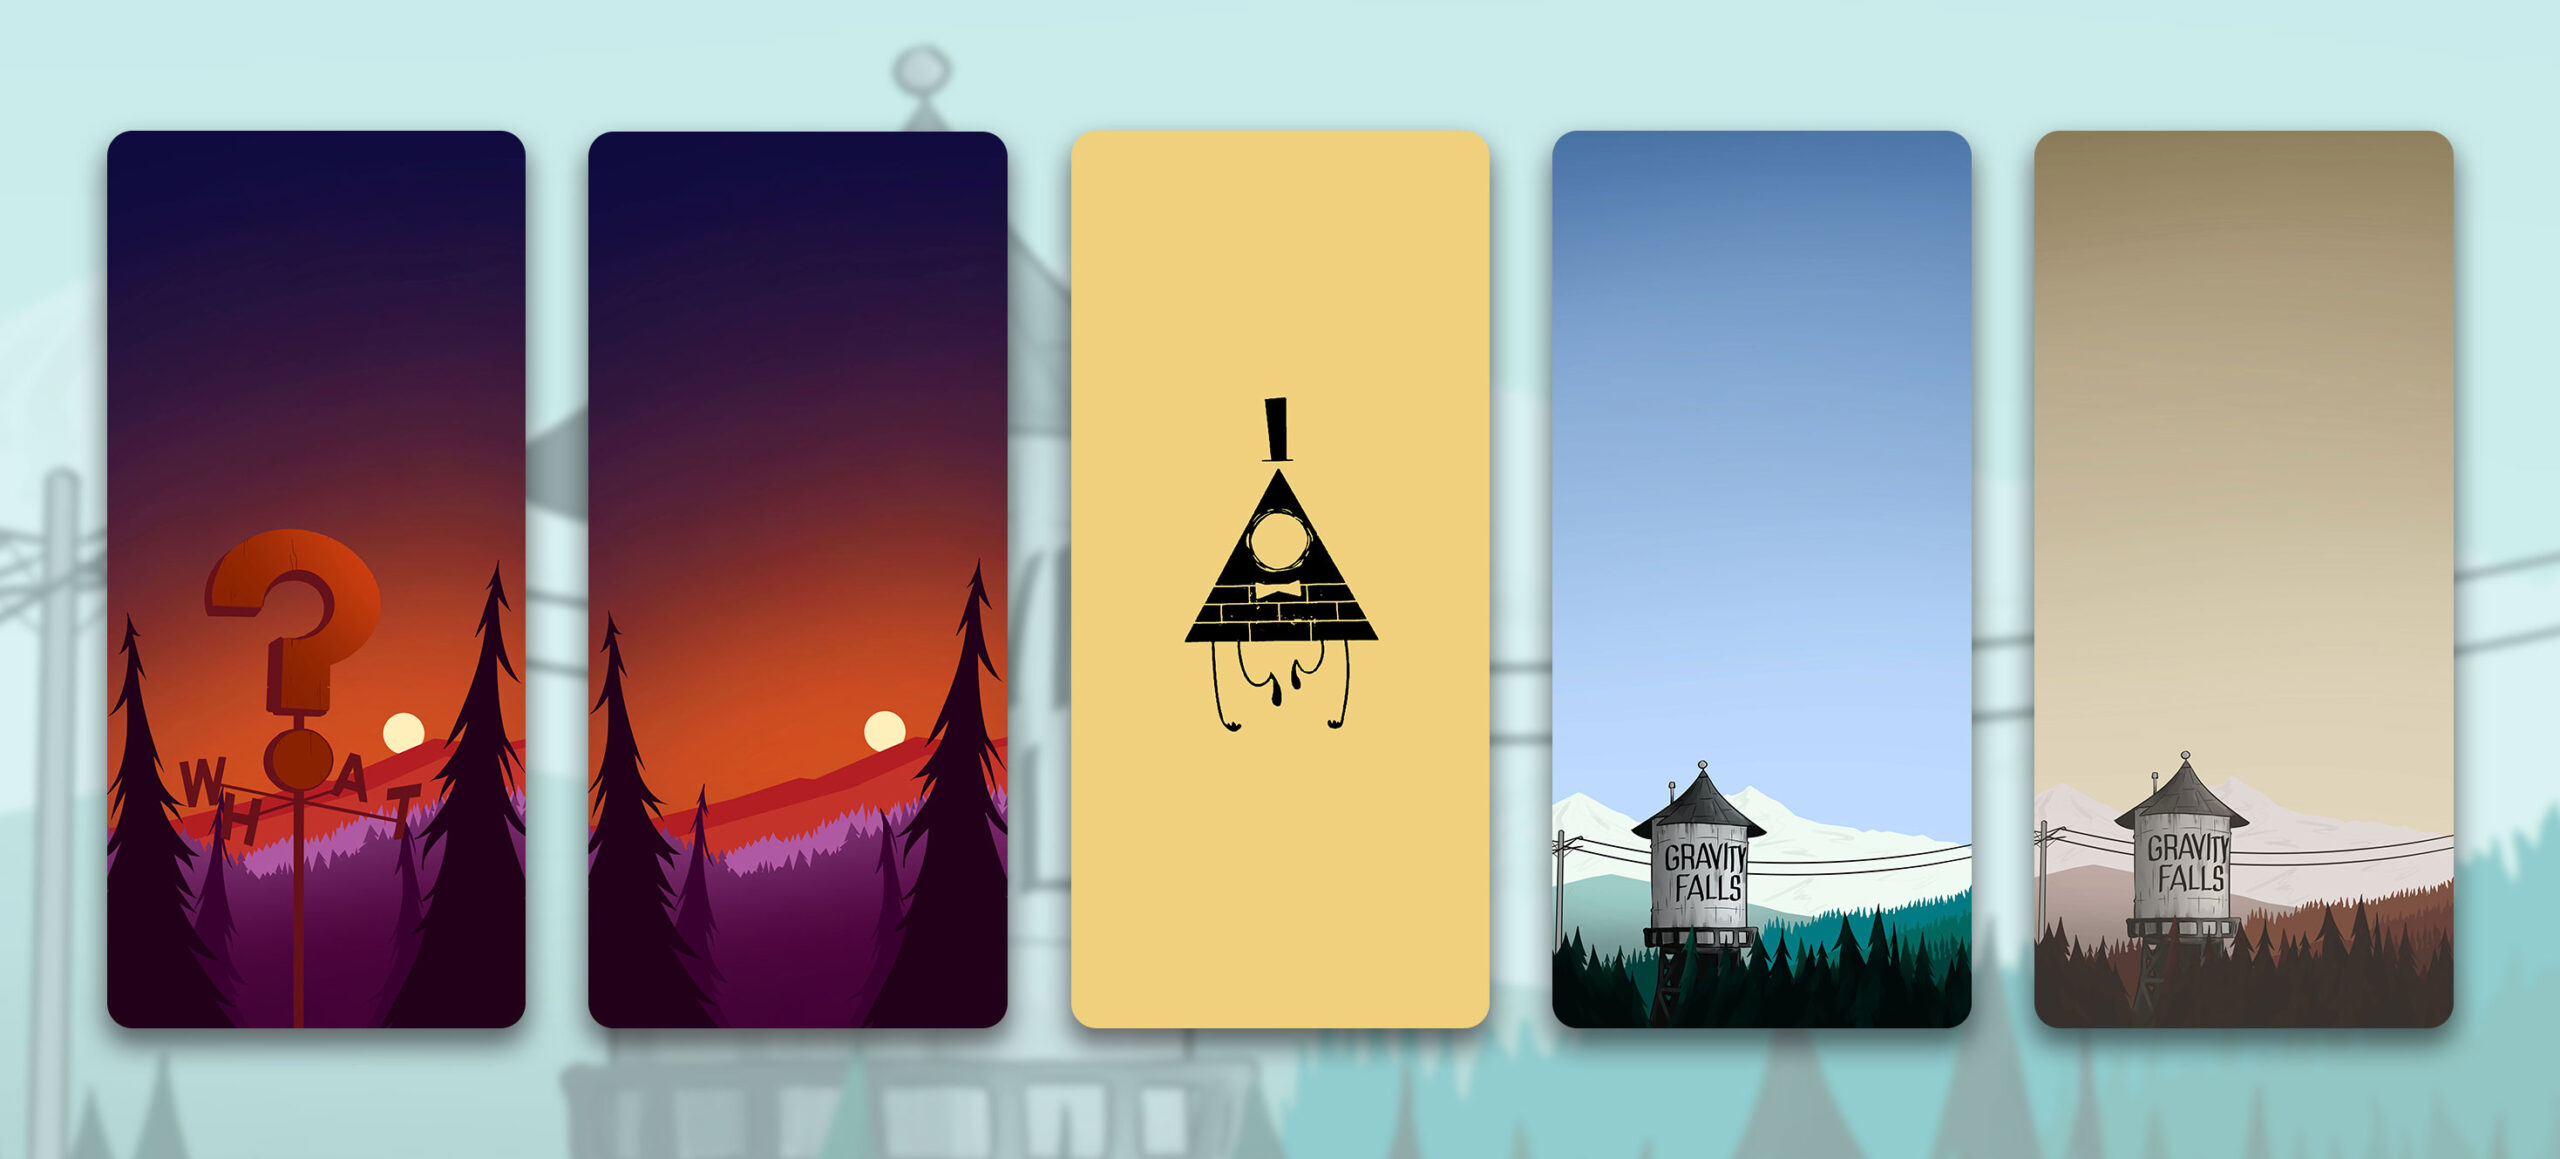 gravity falls wallpapers pack preview 6